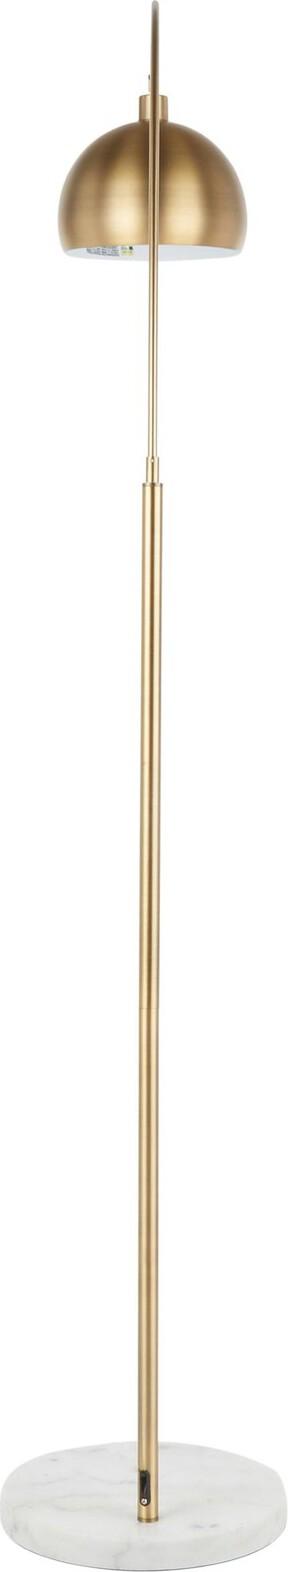 Lumisource Floor Lamps - March Floor Lamp White Marble & Antique Brass